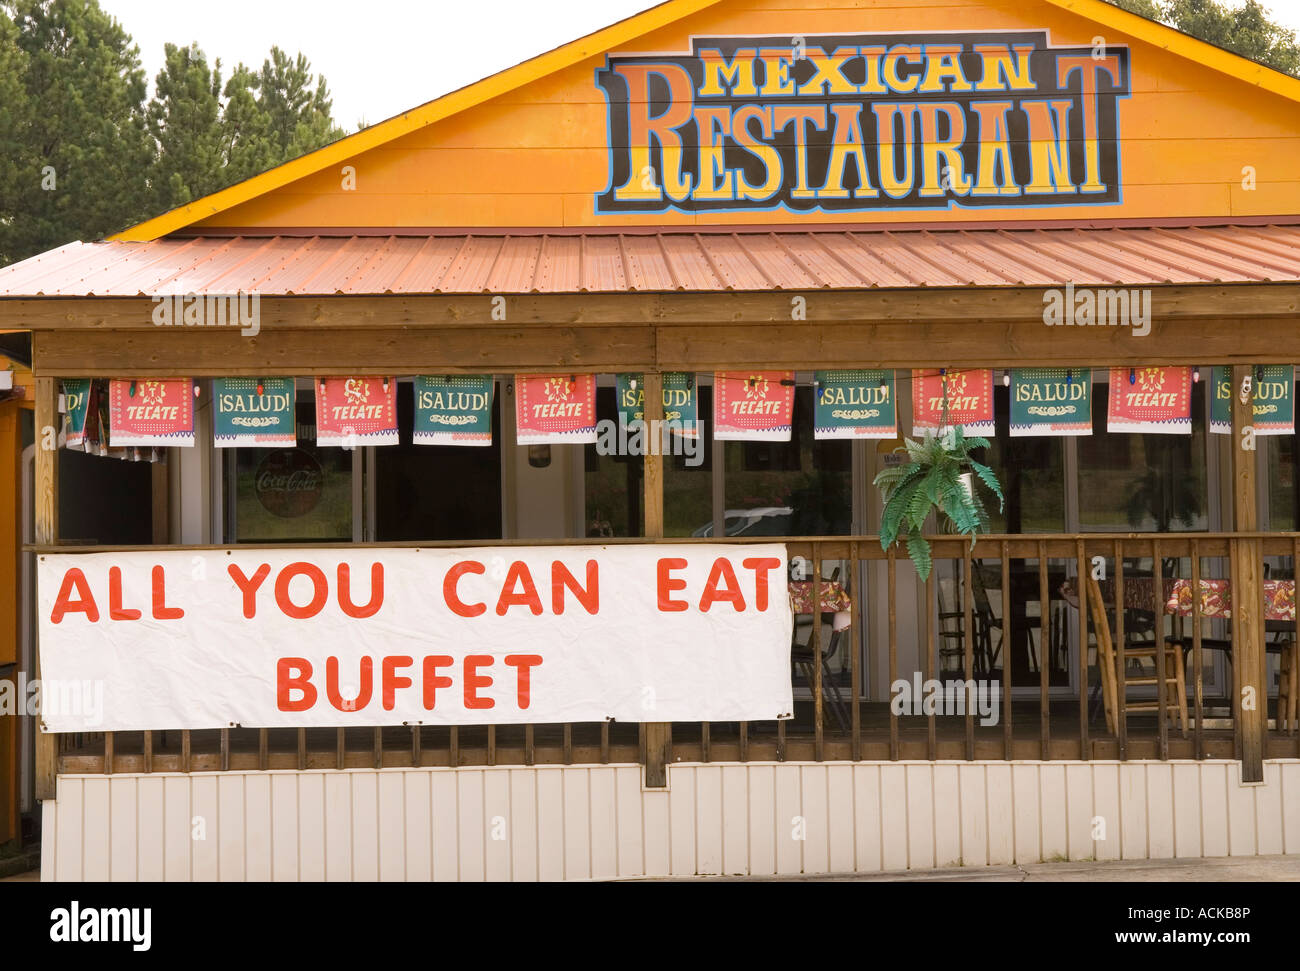 All You Can Eat Buffet Sign Mexican Restaurant, USA. Diet and Nutrition Concept Stock Photo